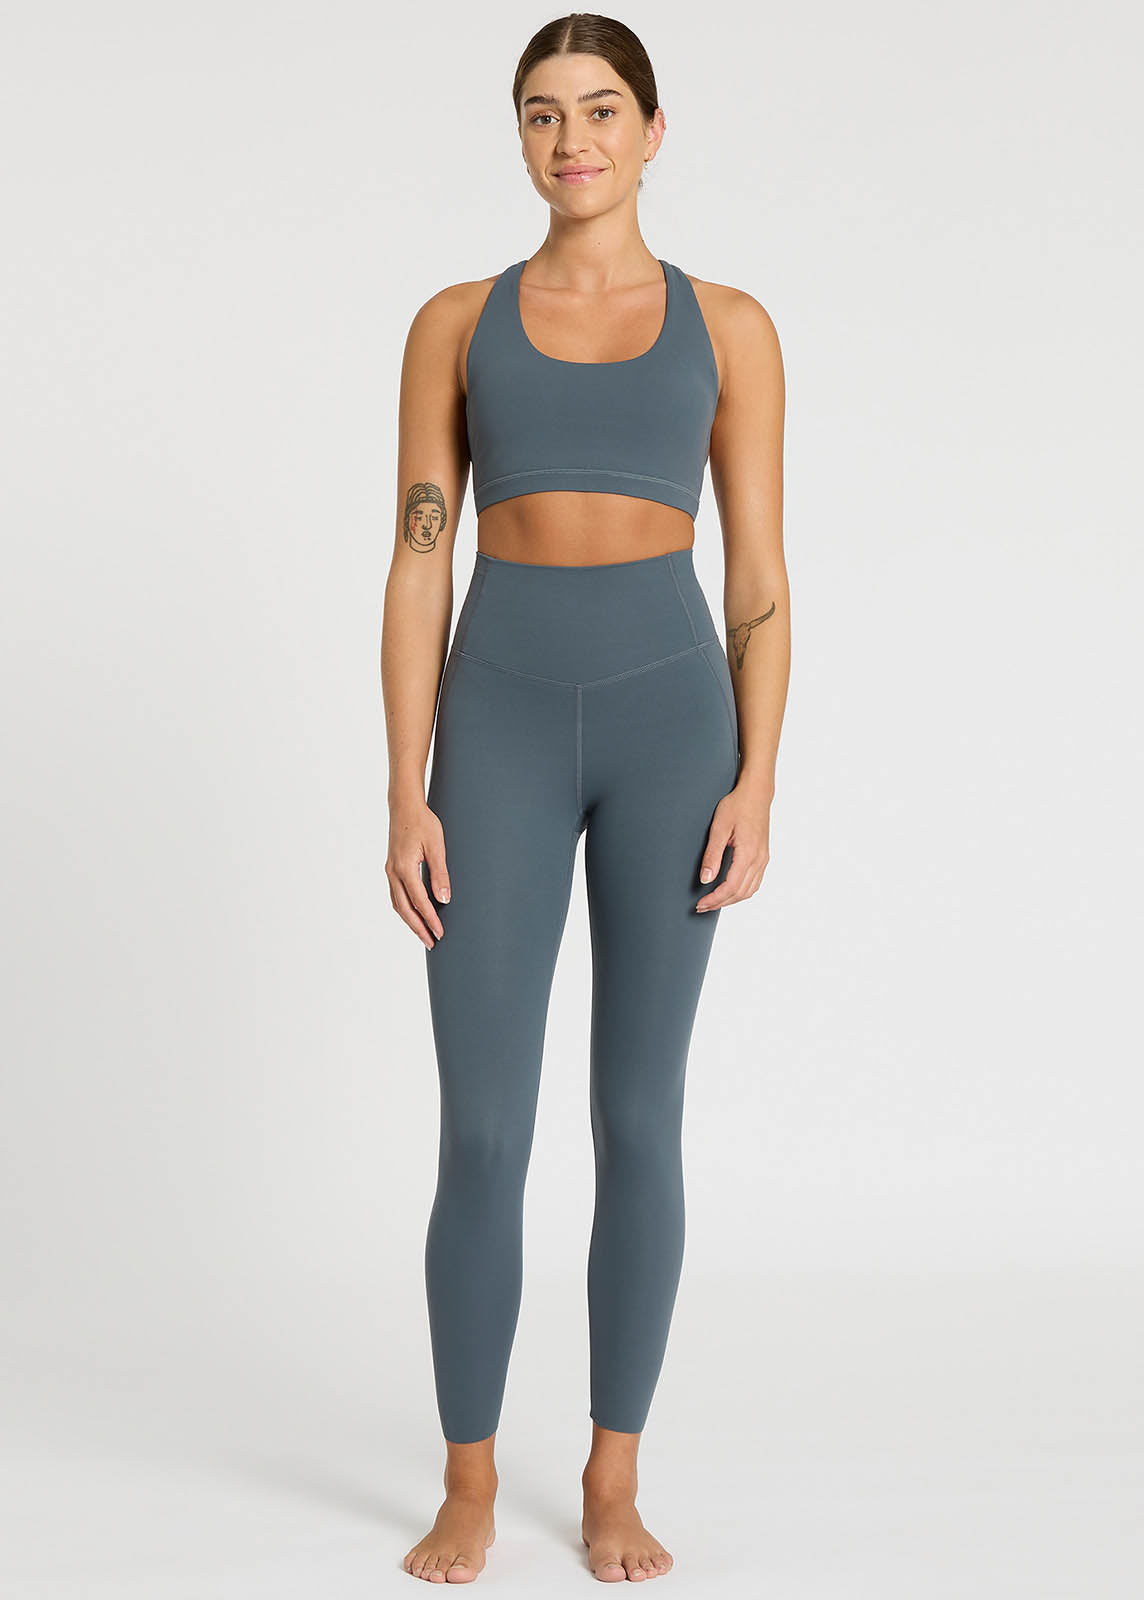 Nimble Activewear Go For It 7/8 Tights - AirRobe